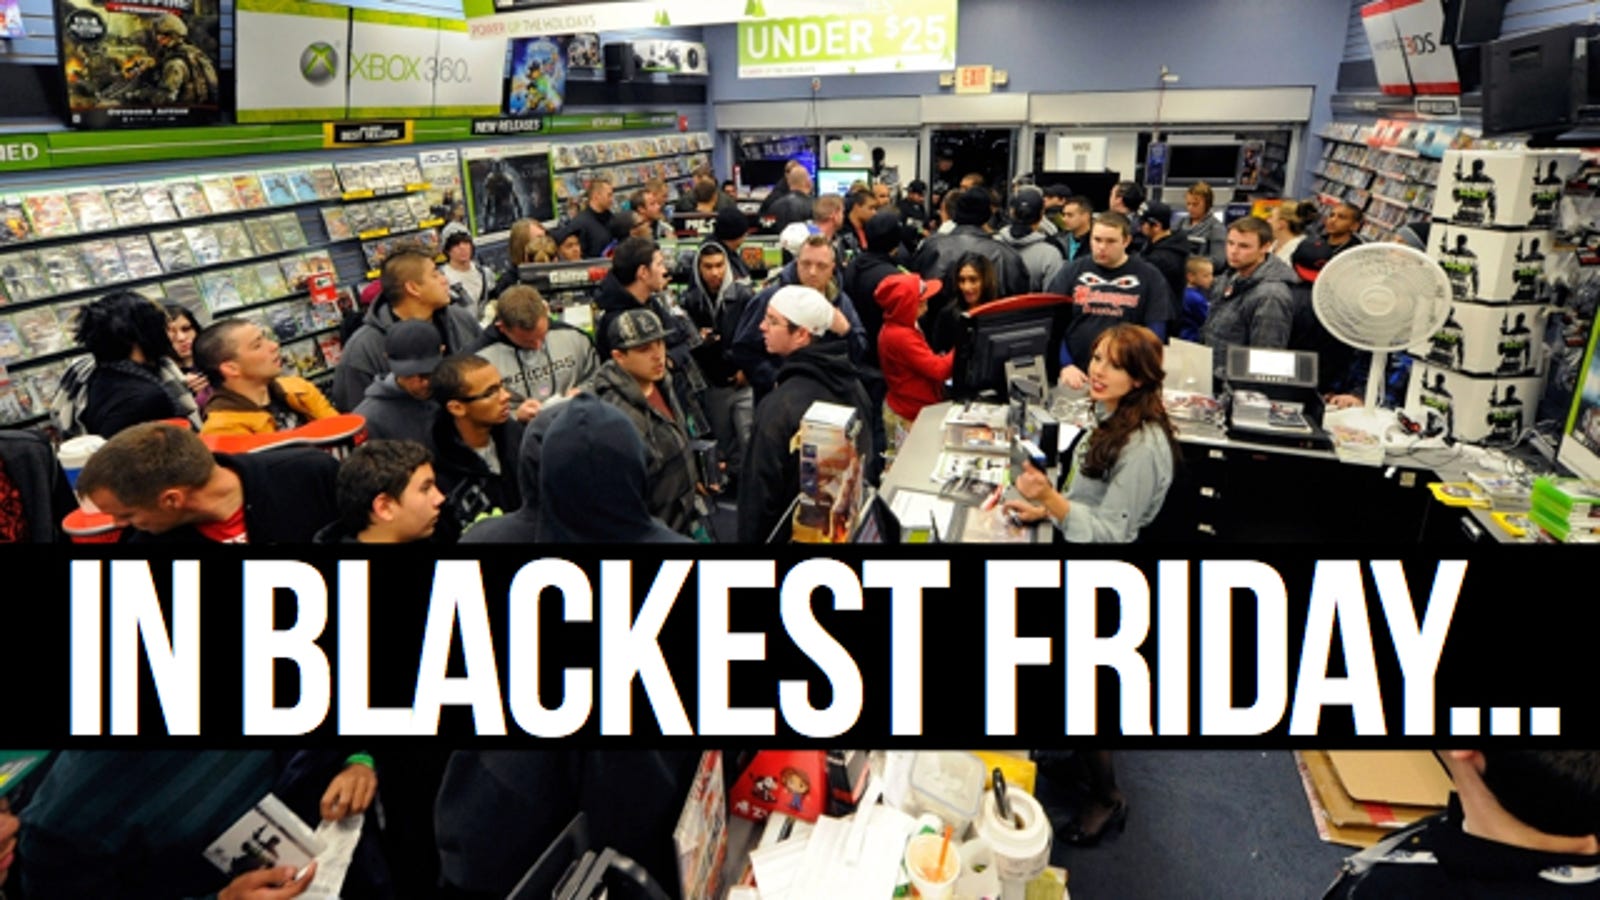 All the Gaming Deals of Black Friday [UPDATED with 80 More Deals] - Will There Be More Deals On Black Friday